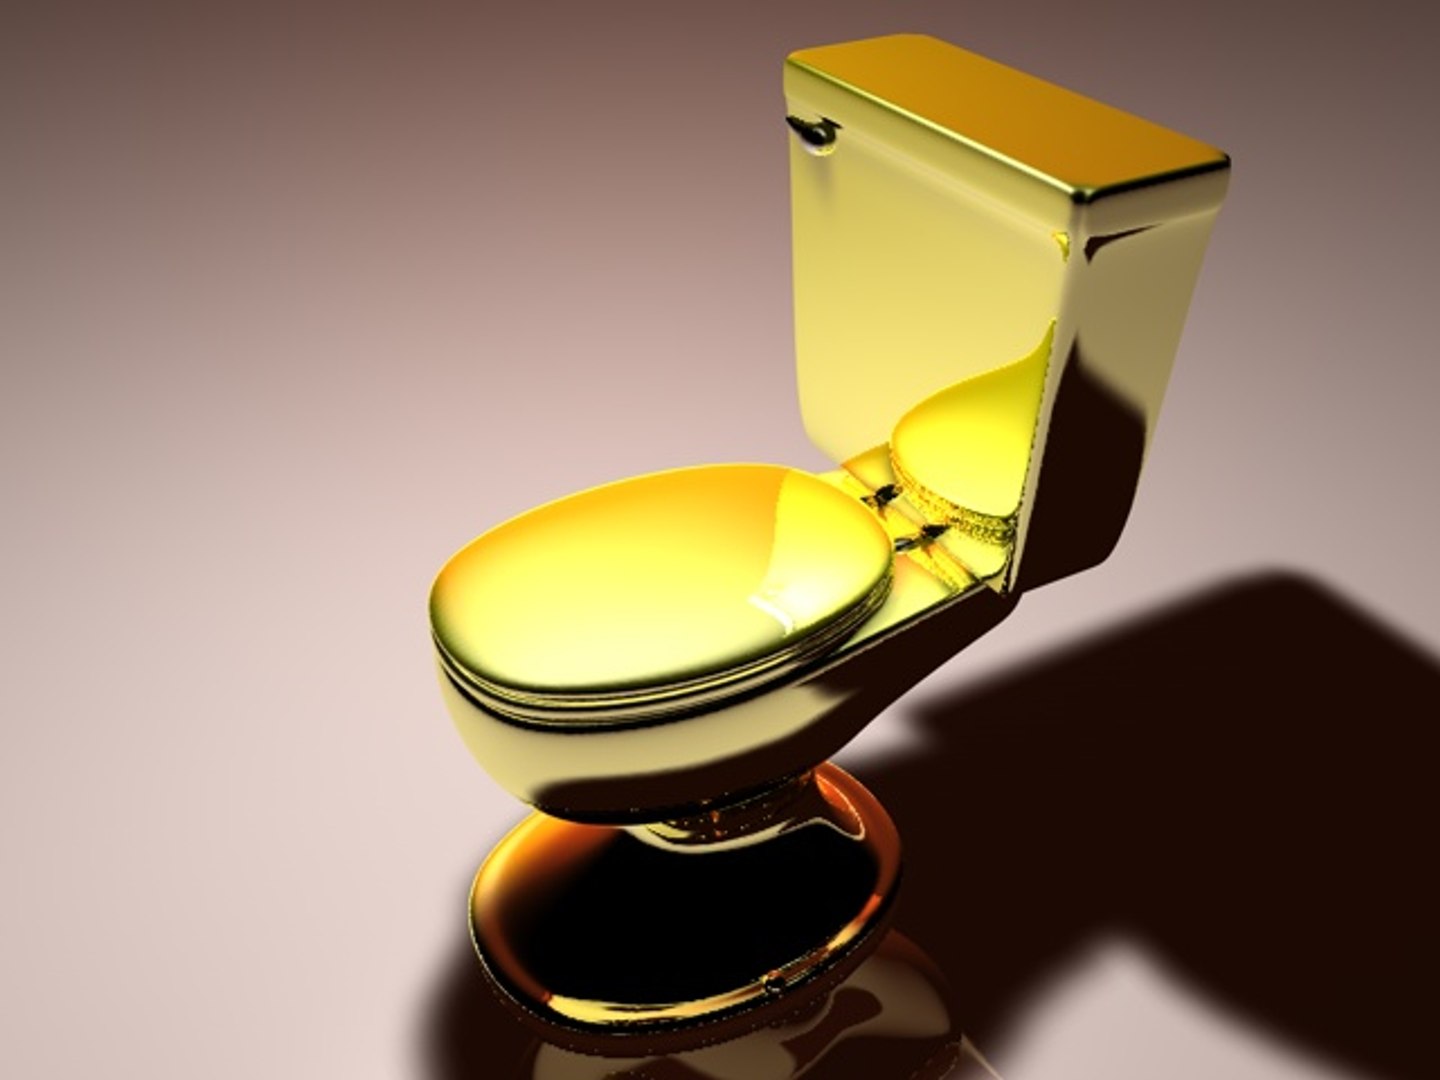 Gold Toilet Object 3d Rendering Stock Photo - Download Image Now